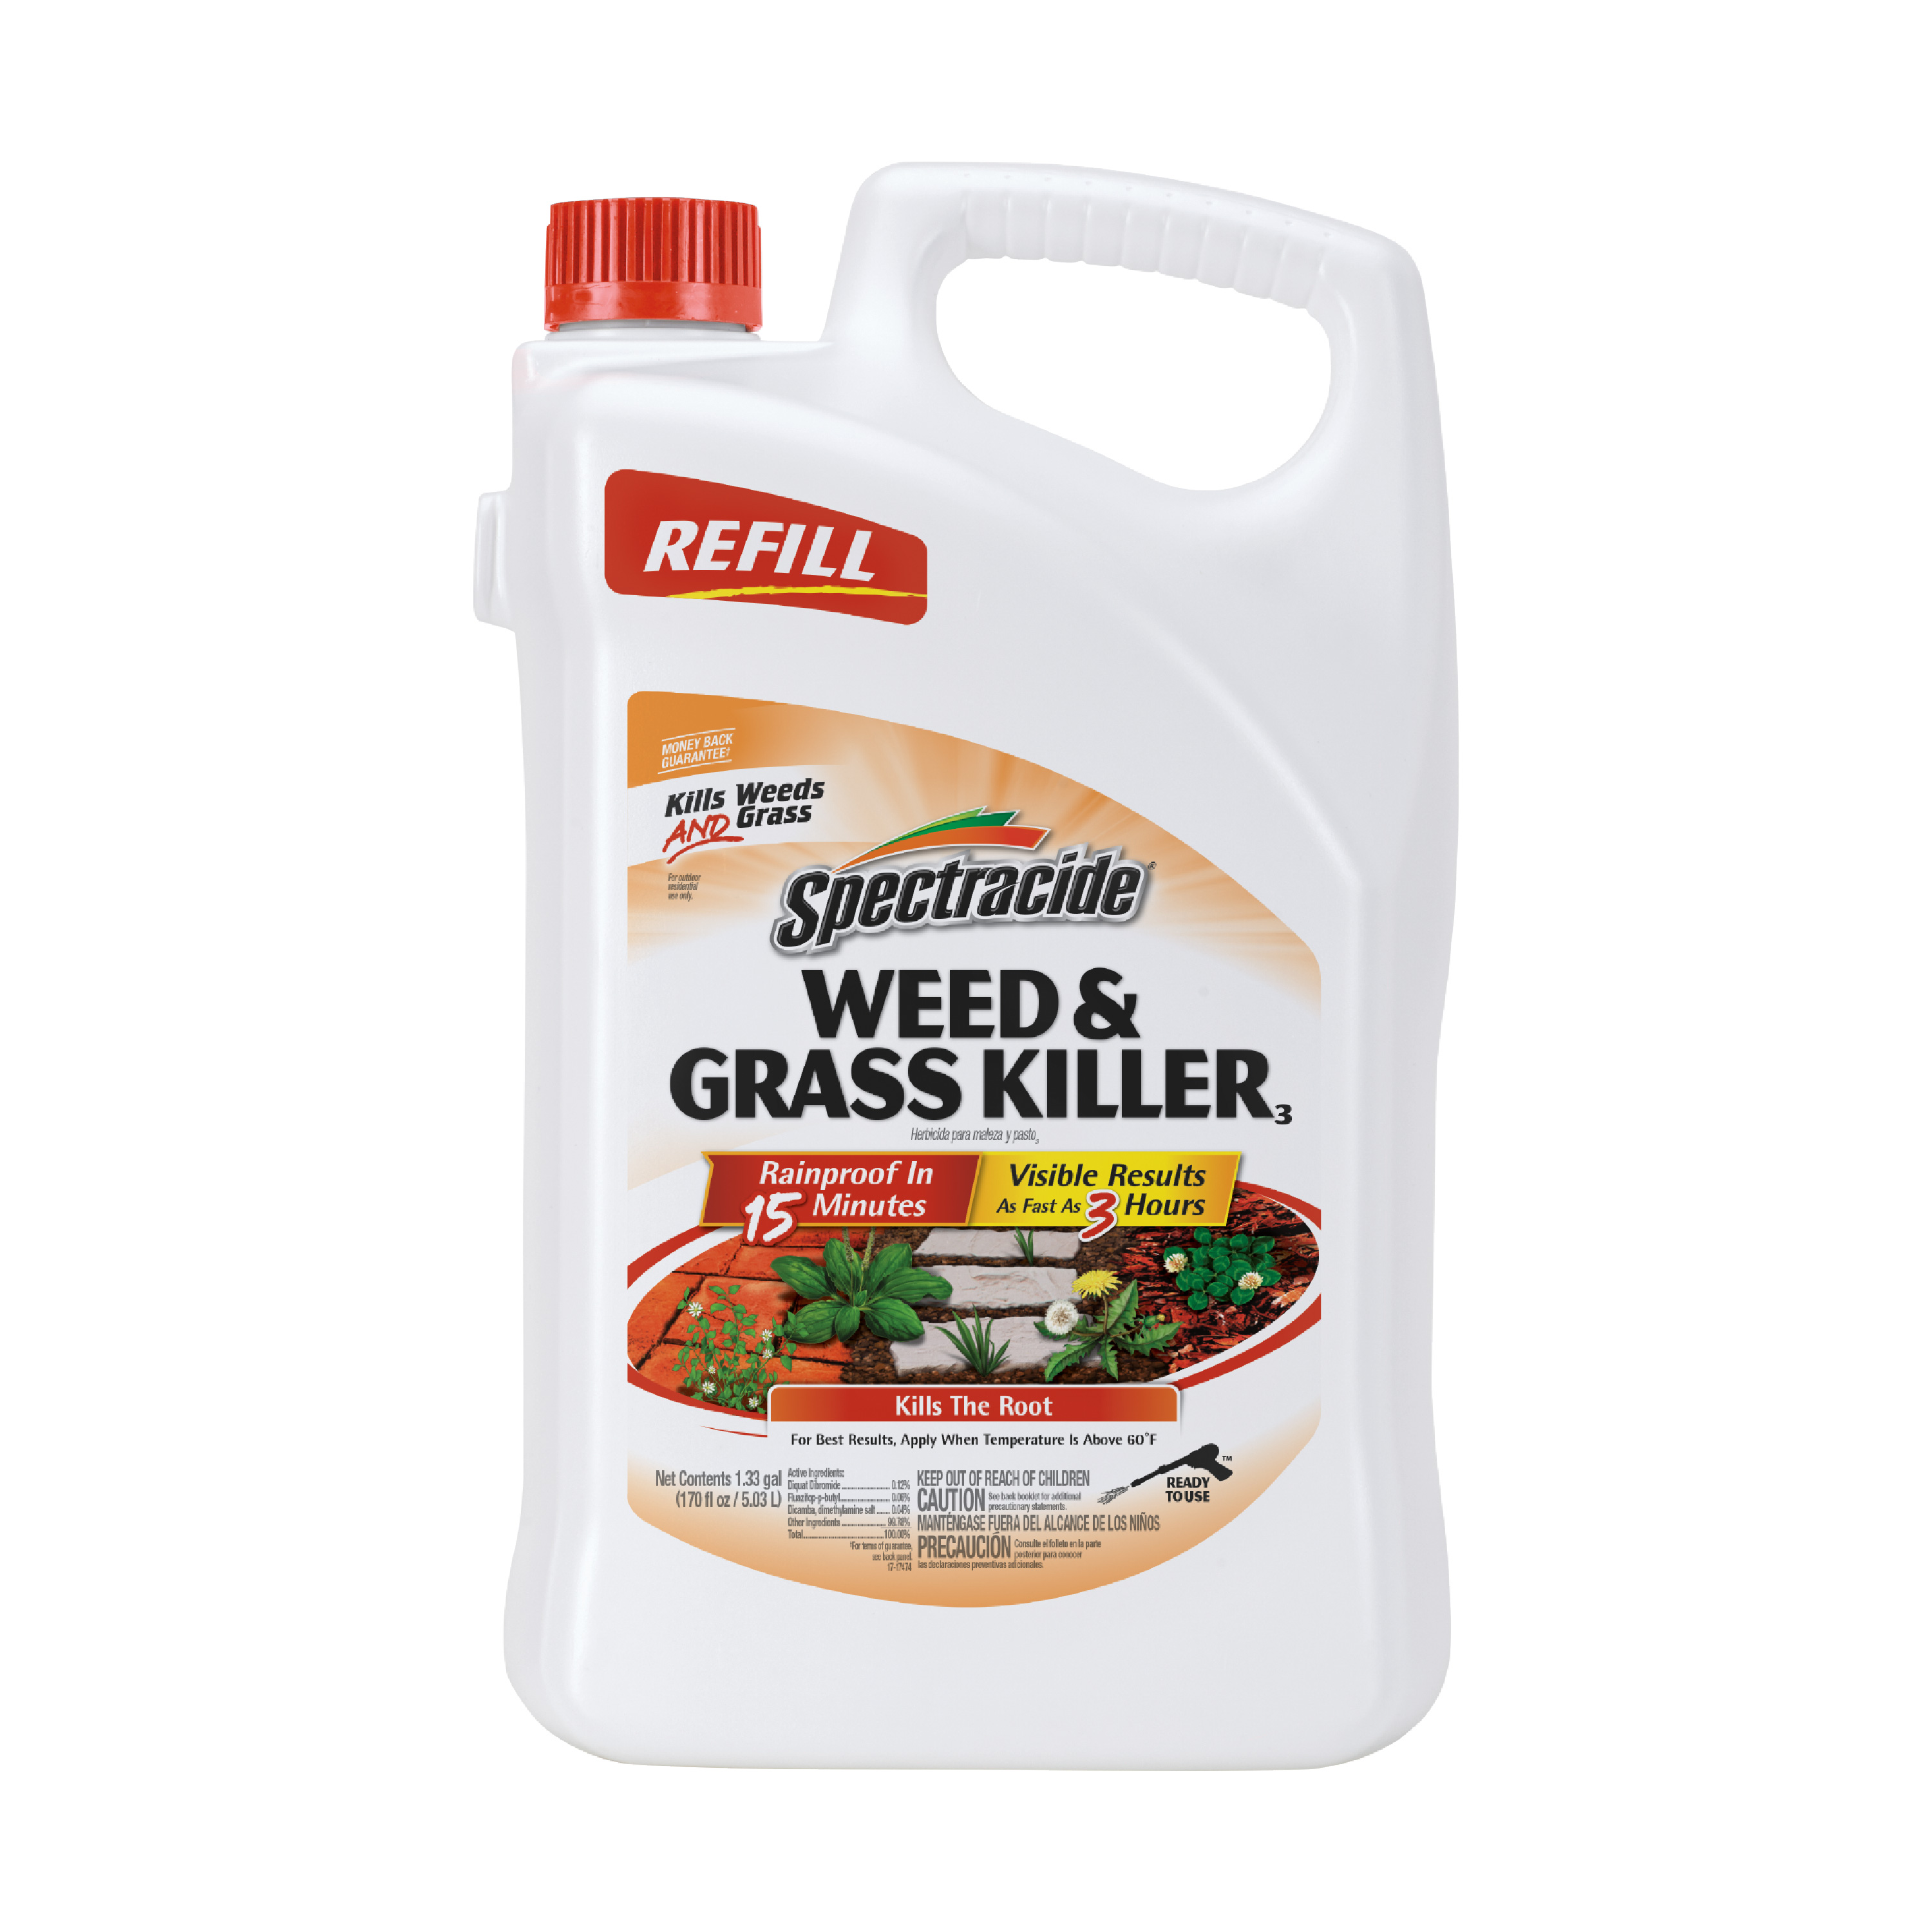 Spectracide Weed & Grass Killer (Refill), Use on Driveways, Walkways and Around Trees and Flower Beds, 1.3 Gallon - image 1 of 13